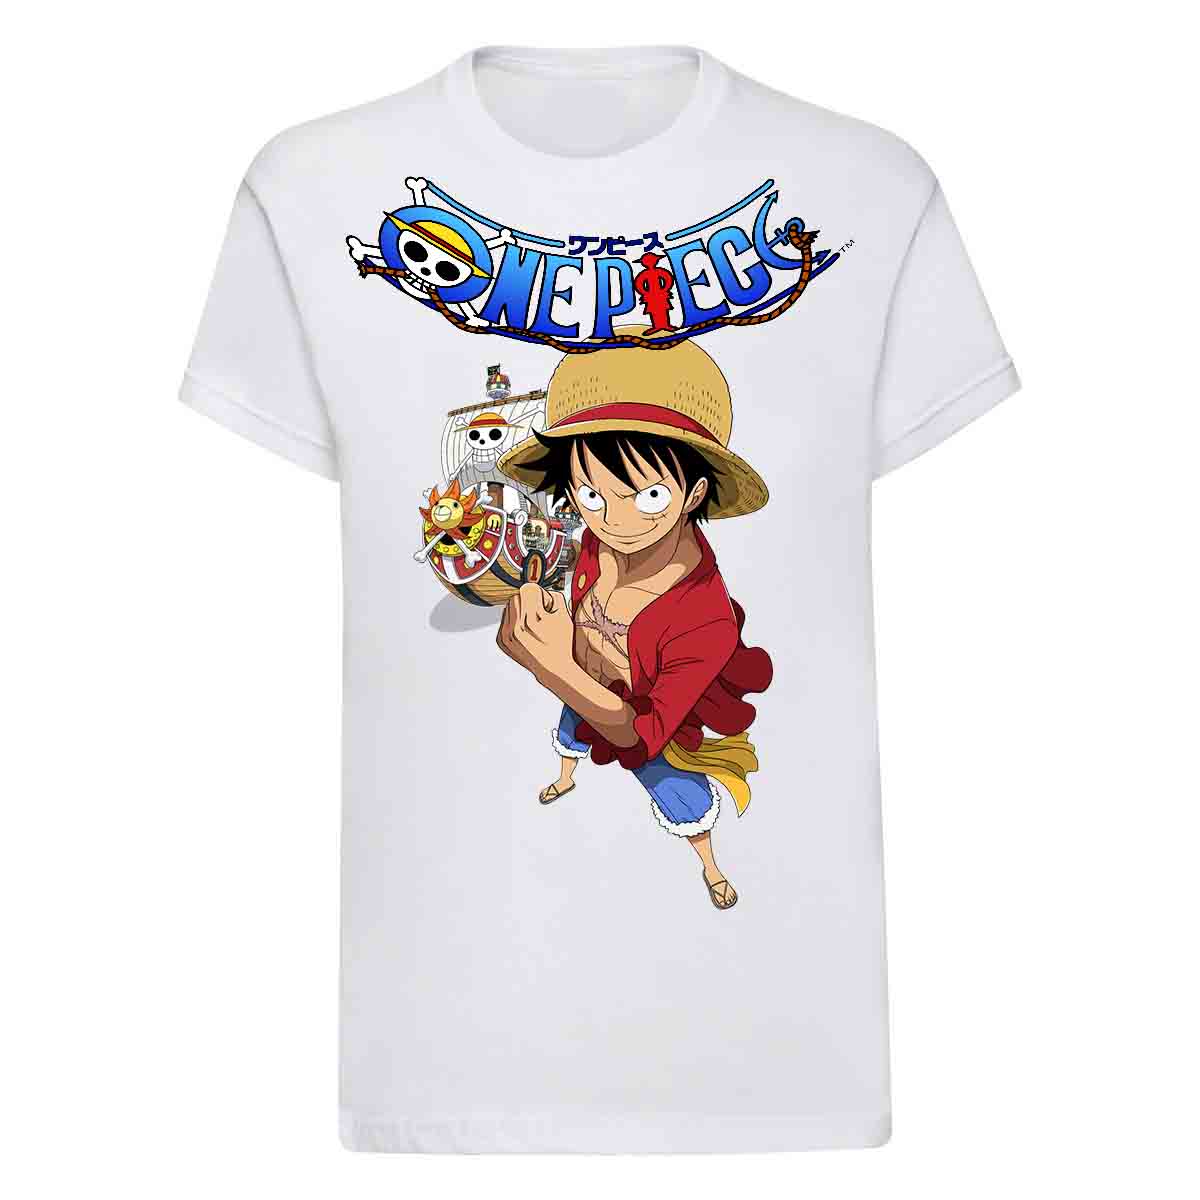 One Piece and Friends T shirt